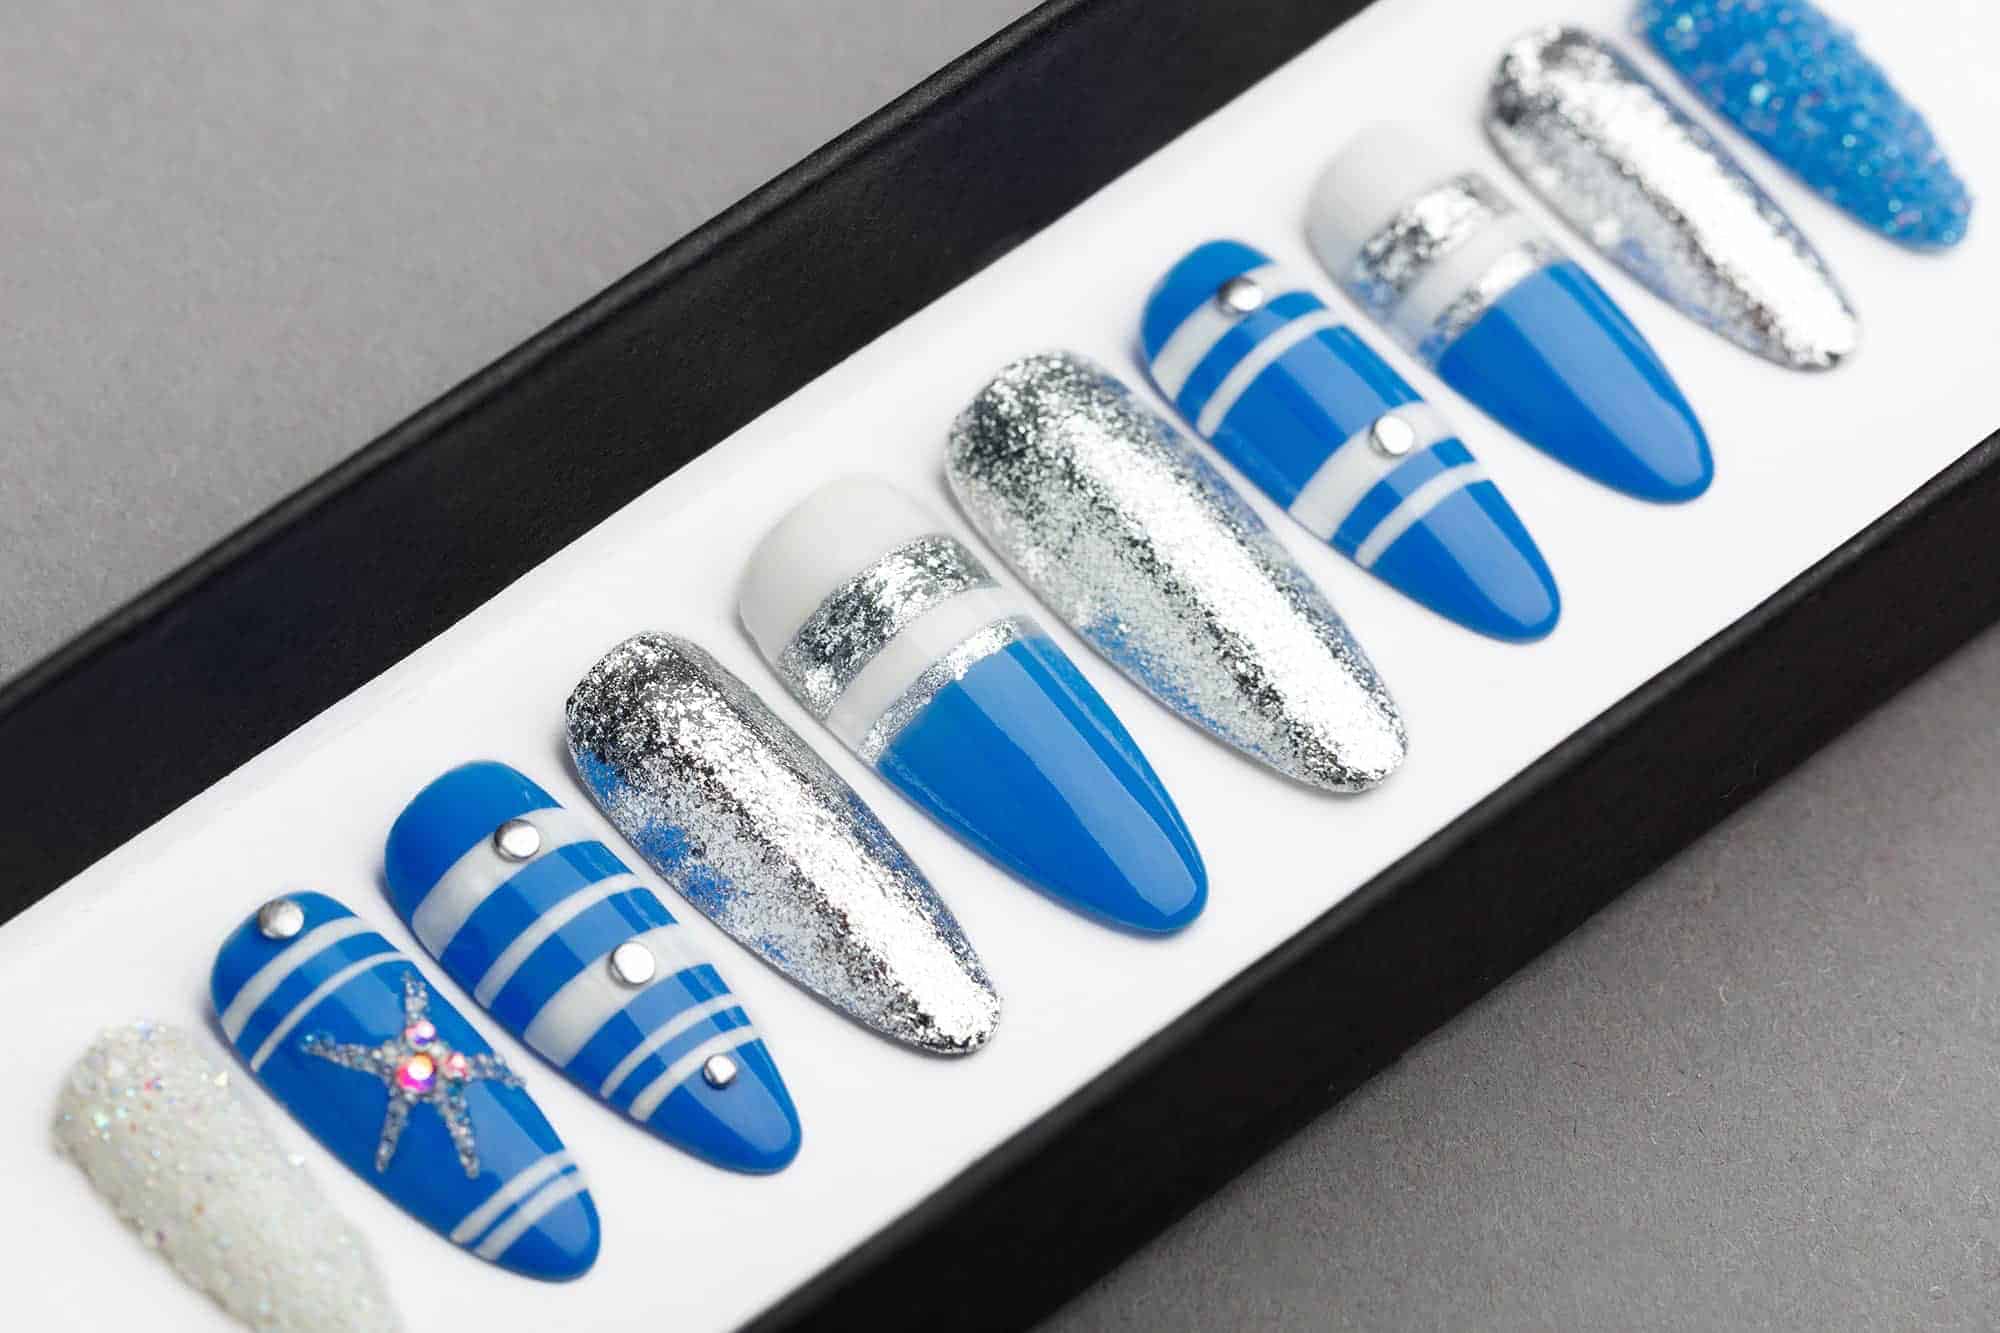 Blue Ocean Press on Nails with Glitters